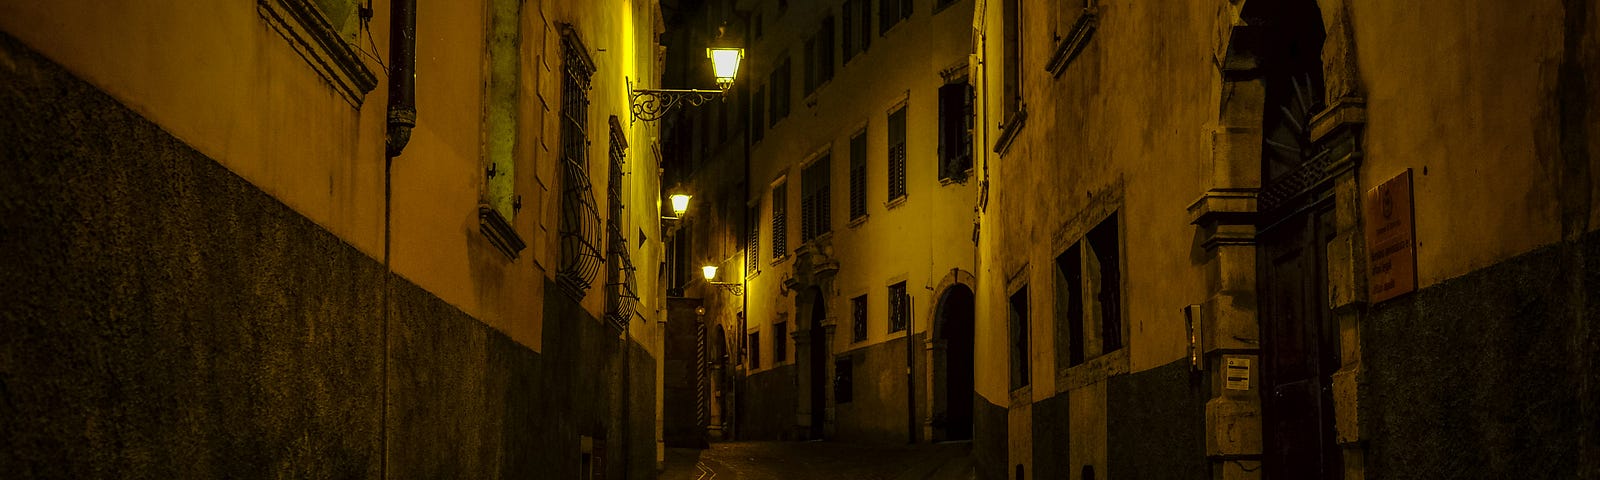 A dimly lit alley in an old European town.